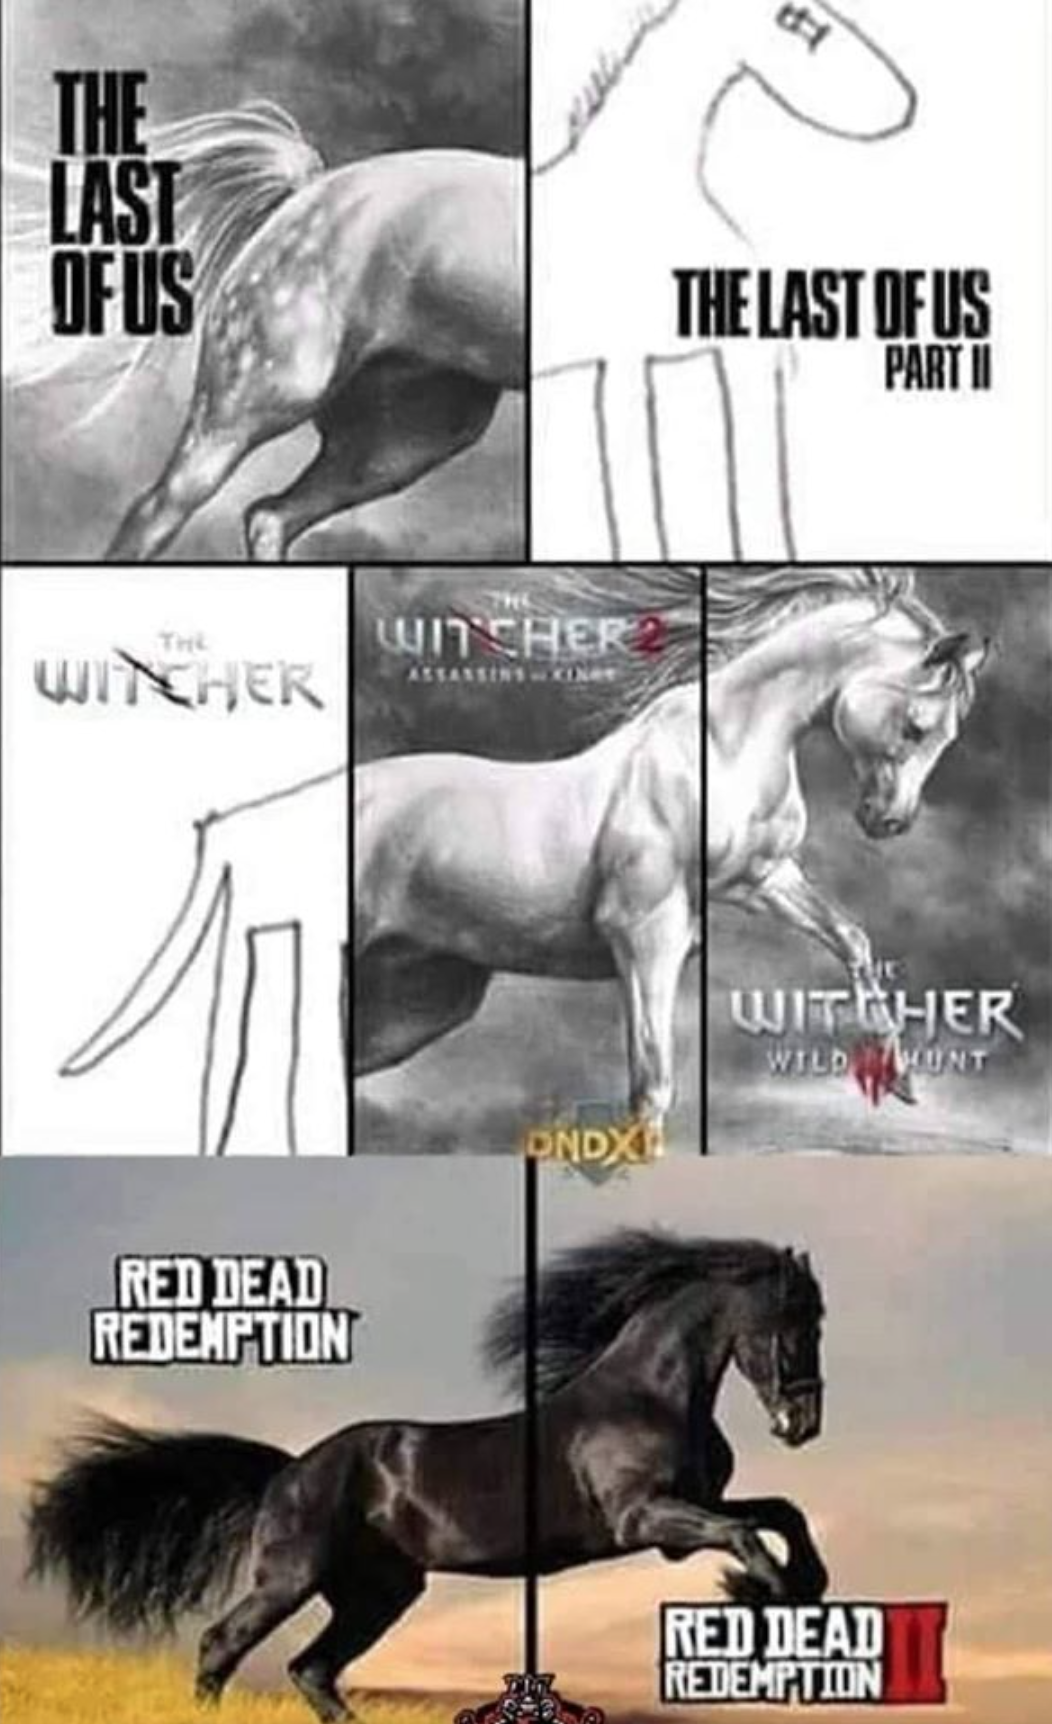 do you guys remember the witcher 3 - The Last Of Us The Last Of Us Part Ii Uncher Wither Witcher Wild Wint Ondx Red Dead Redemption Red Dead Redemption